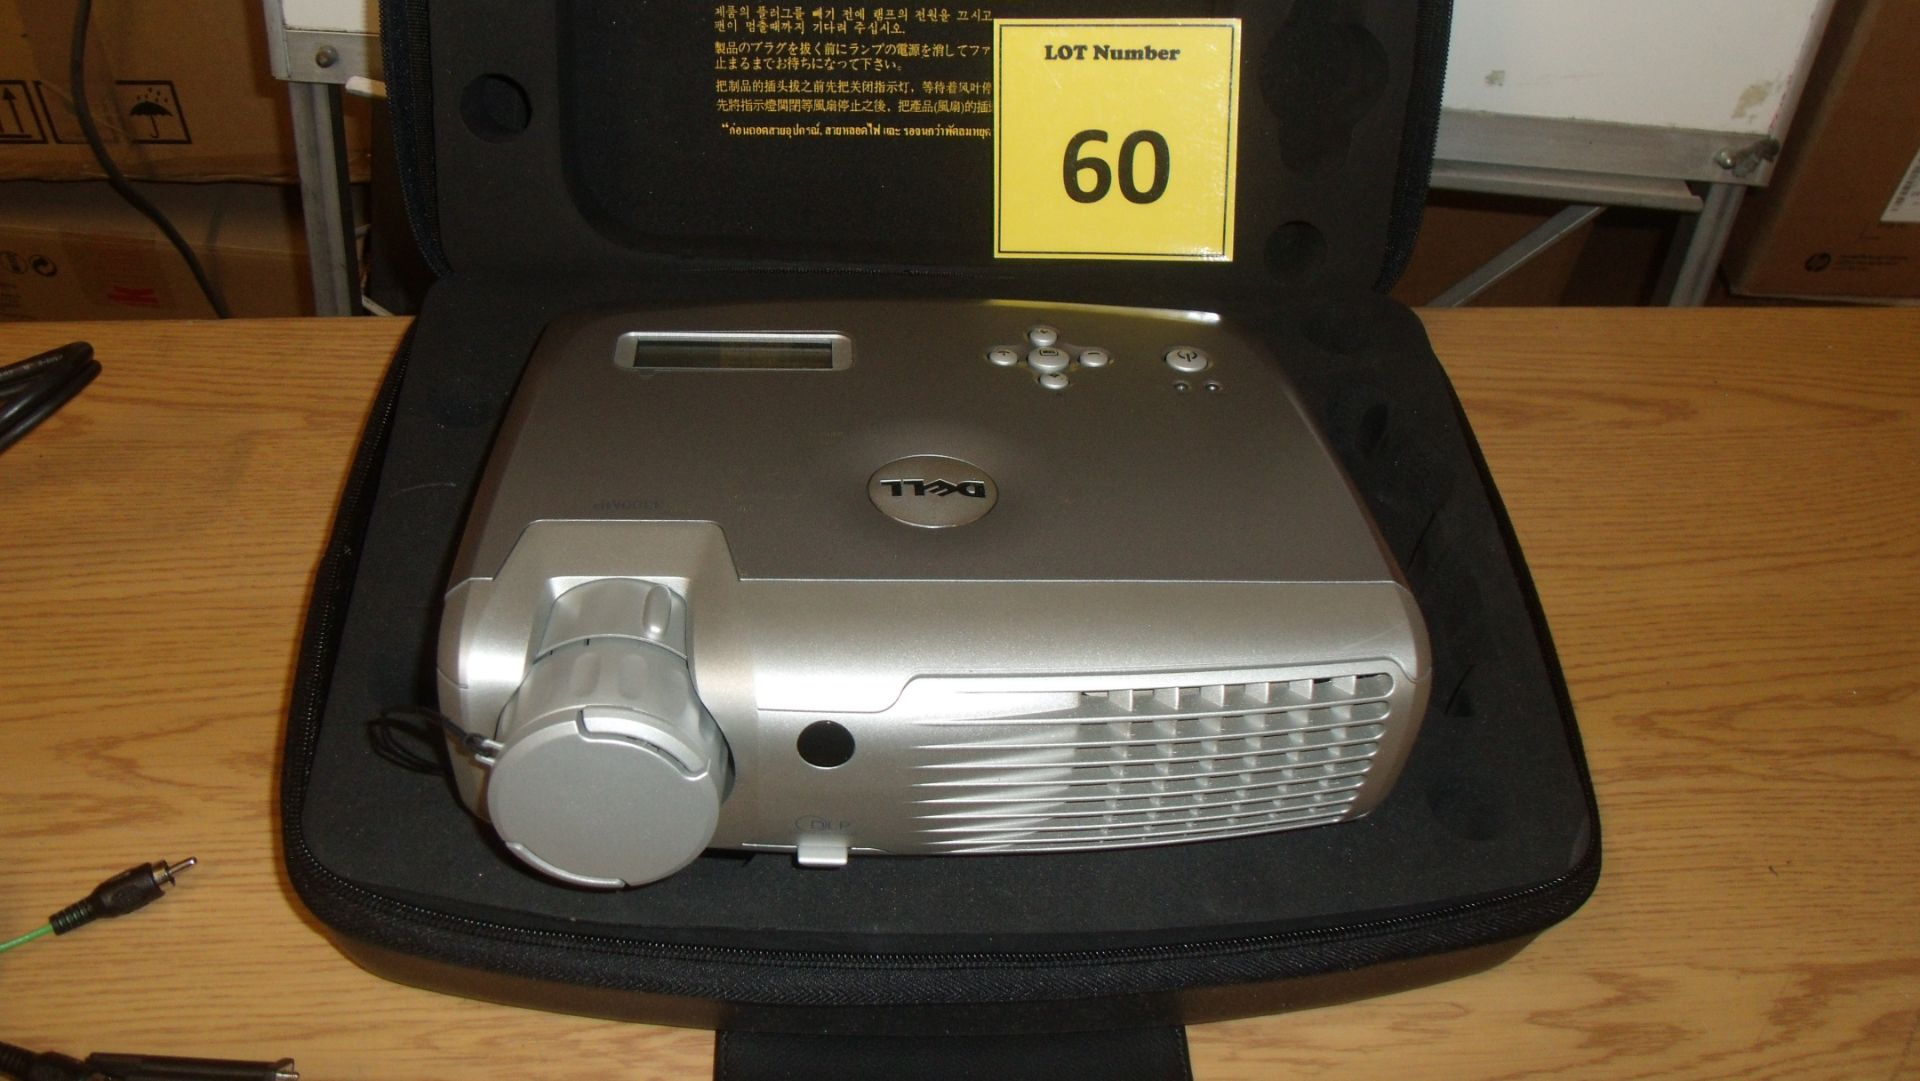 DELL 3300MP PROJECTOR IN ORIGINAL CARRY CASE WITH REMOTE CONTROL AND CABLES. BRIGHT CRISP PICTURE, - Image 2 of 2